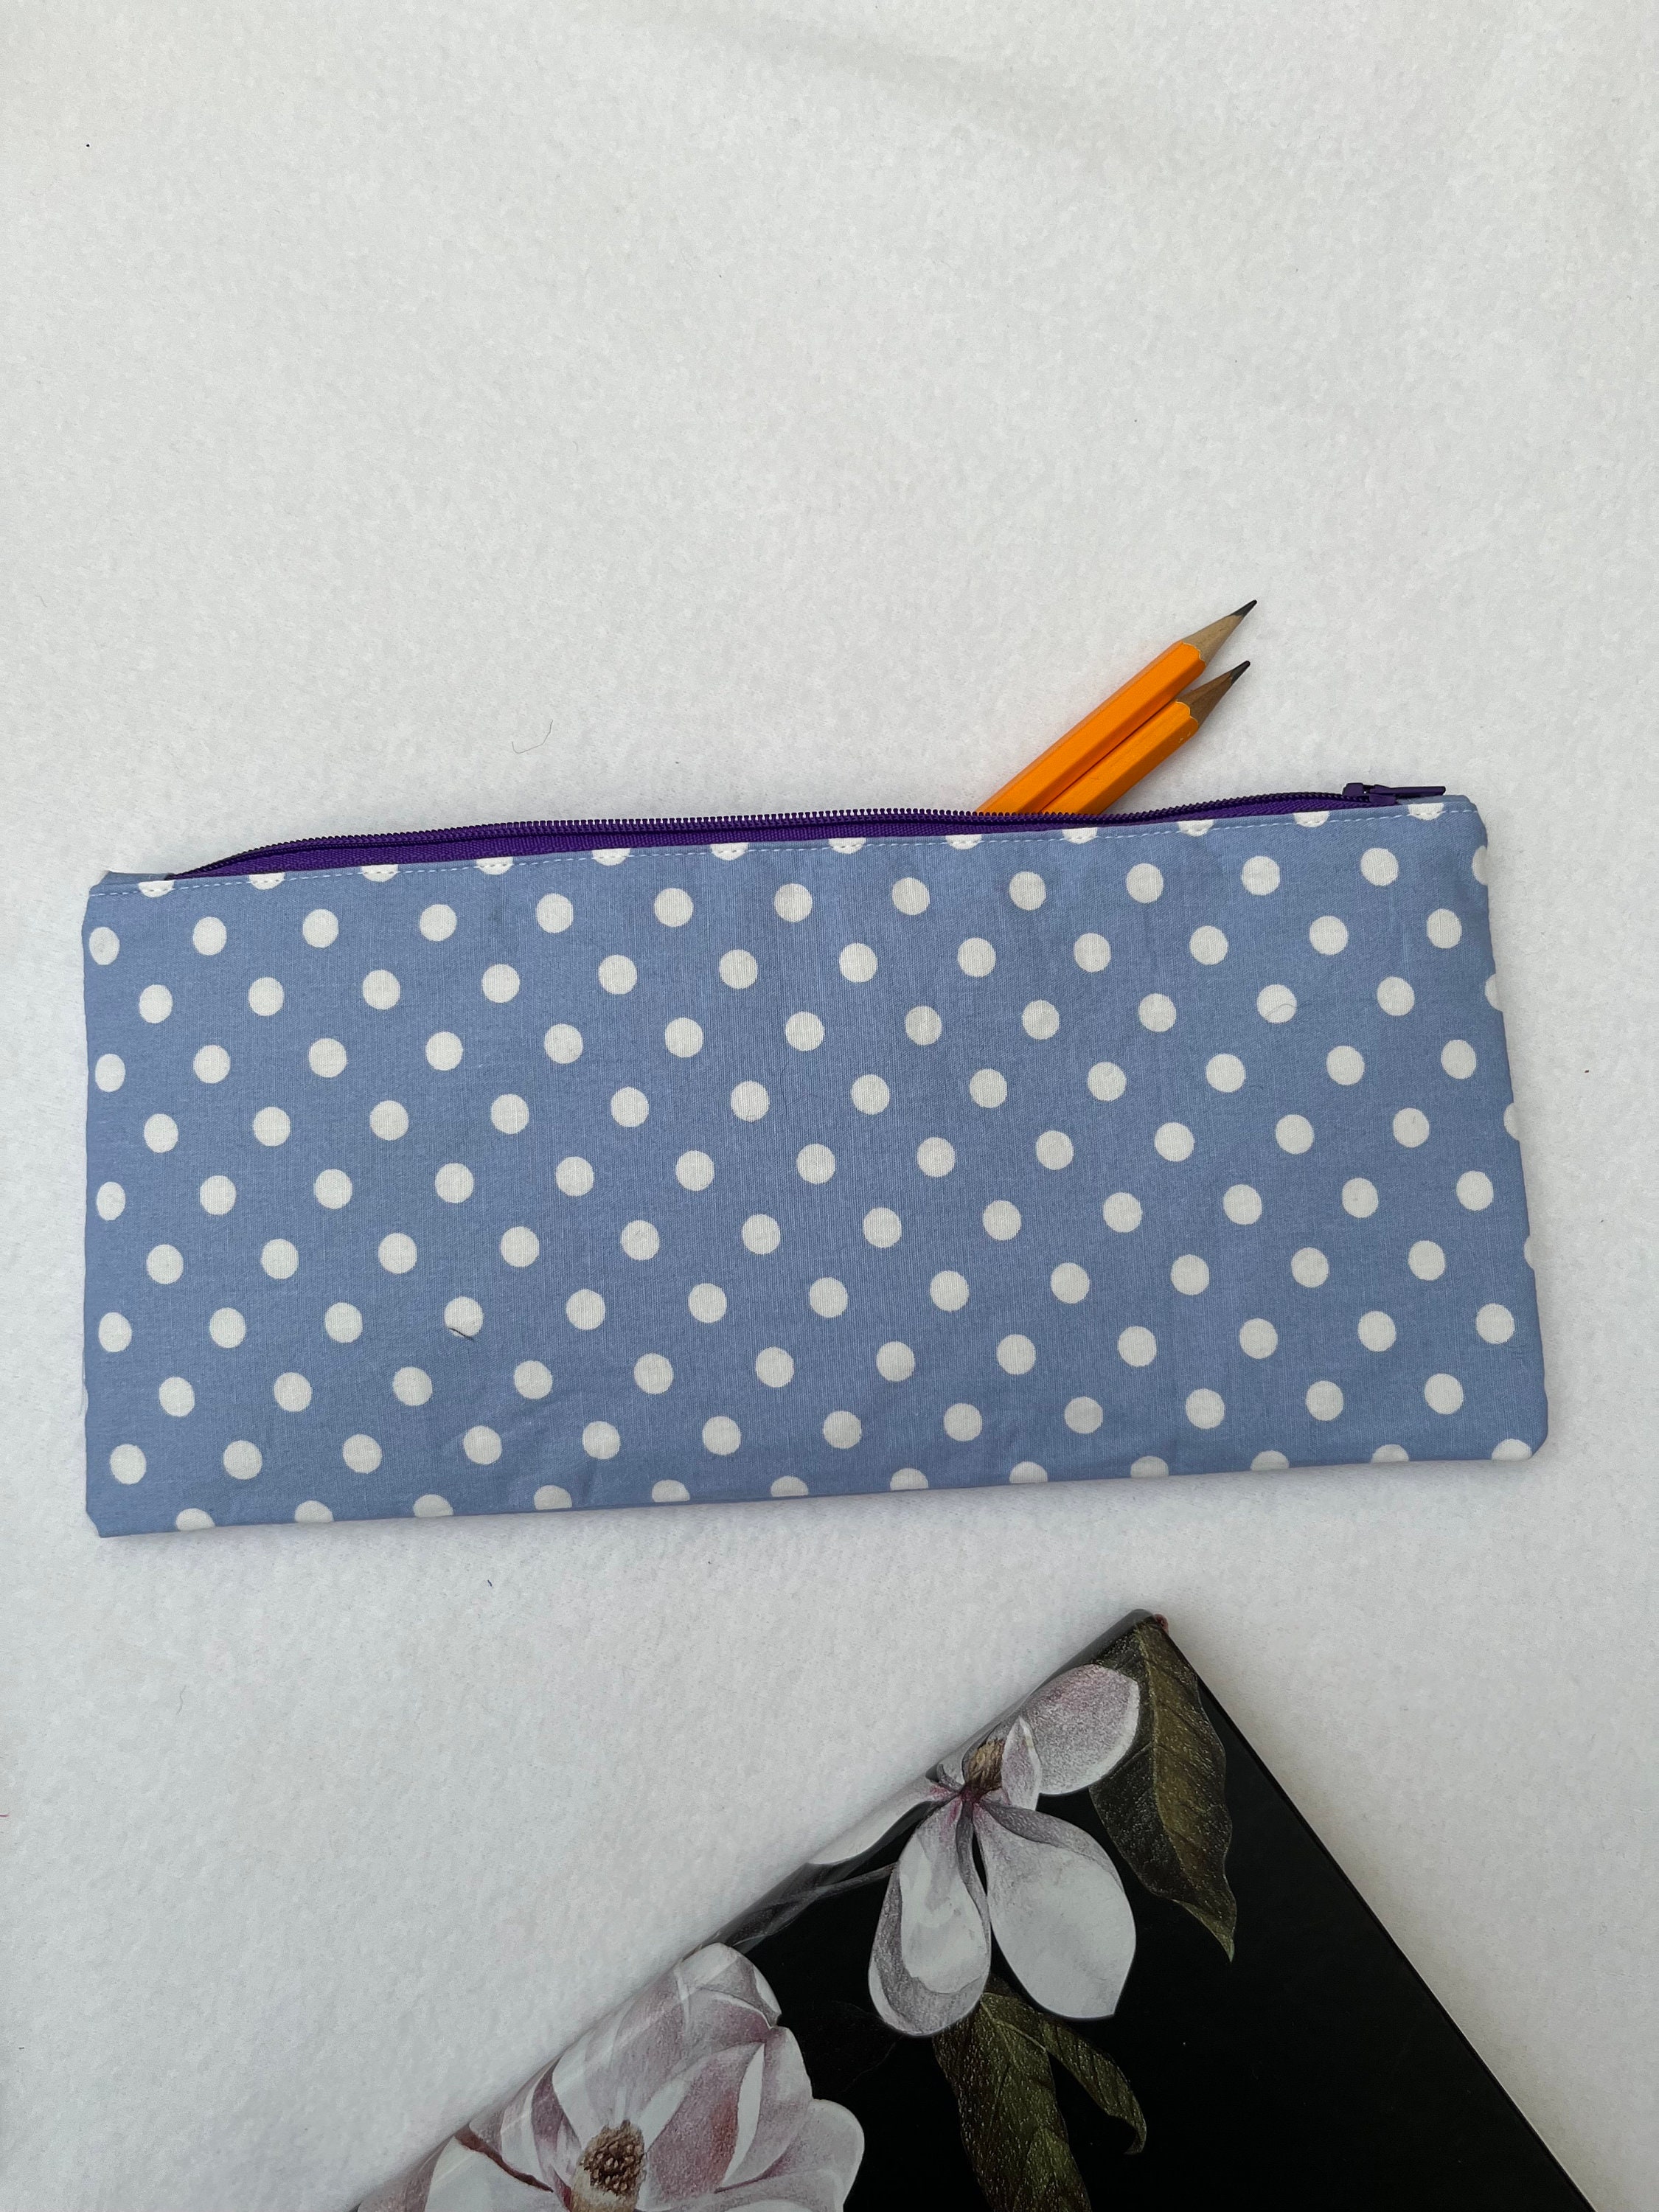 Polka Dot on Pale Blue Fabric Pencil Case, Back to School Pencil Case,  Water Resistant Lined Pouch, School Pencil Case, College Stationery 